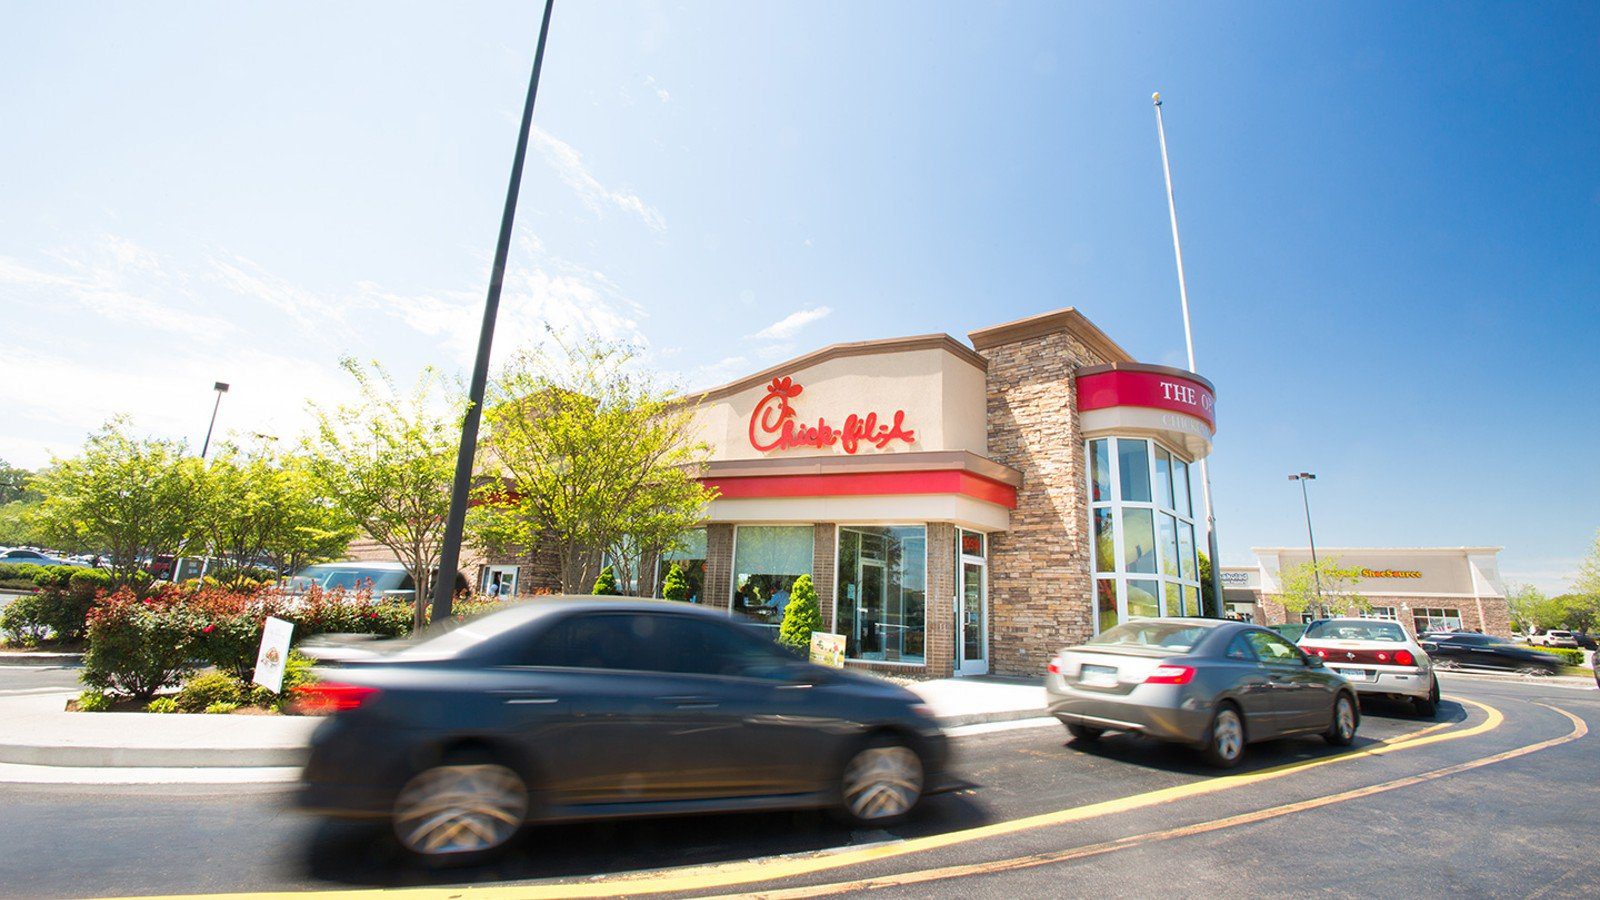 Chick-fil-A confirms accounts hacked in months-long “automated” attack